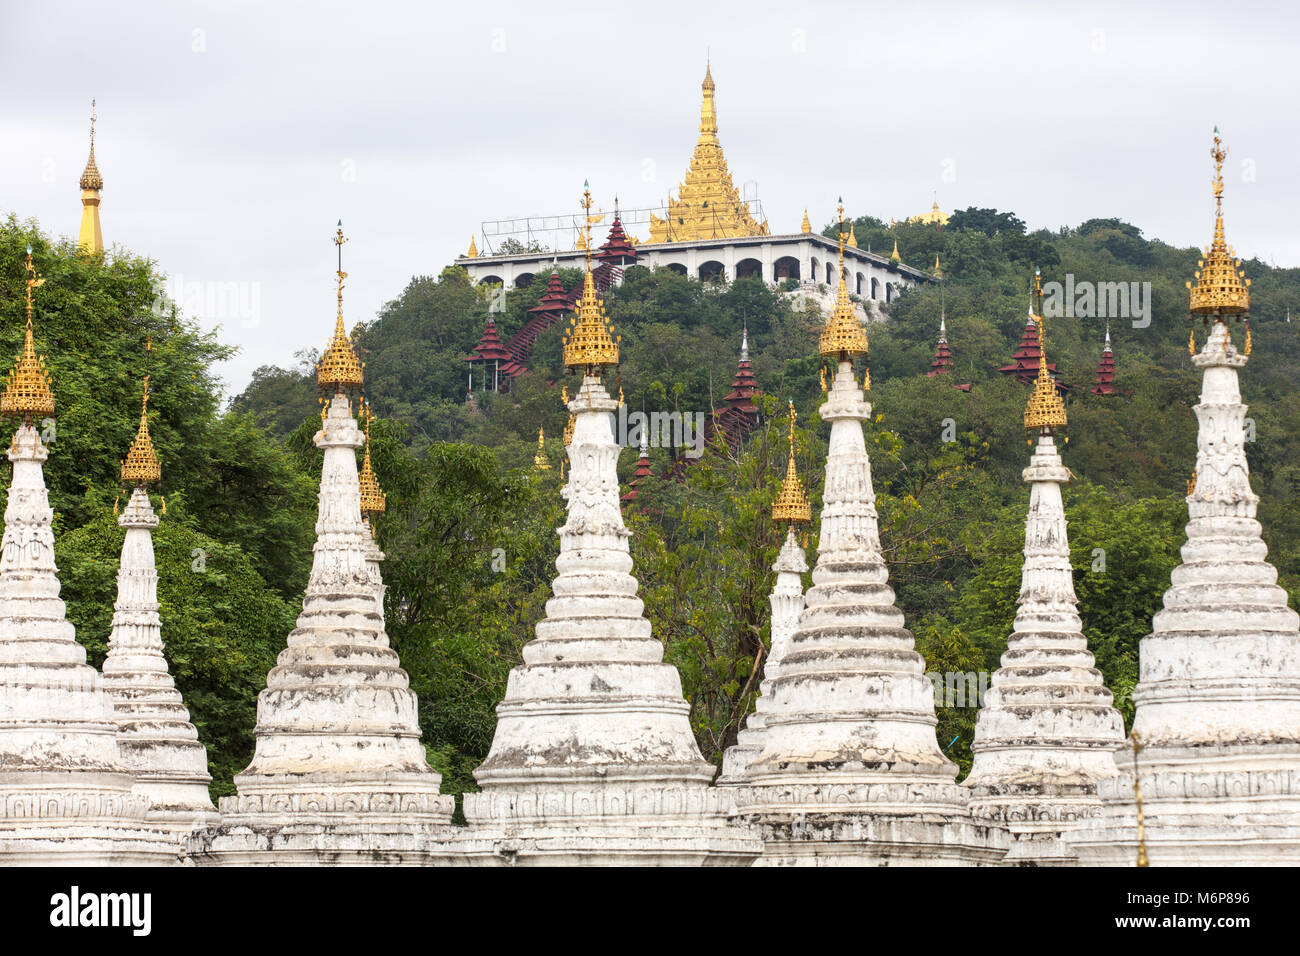 The white stupas of the Sandamuni Pagoda with the Mandalay Hill in the background.. Myanmar (Burma). Stock Photo